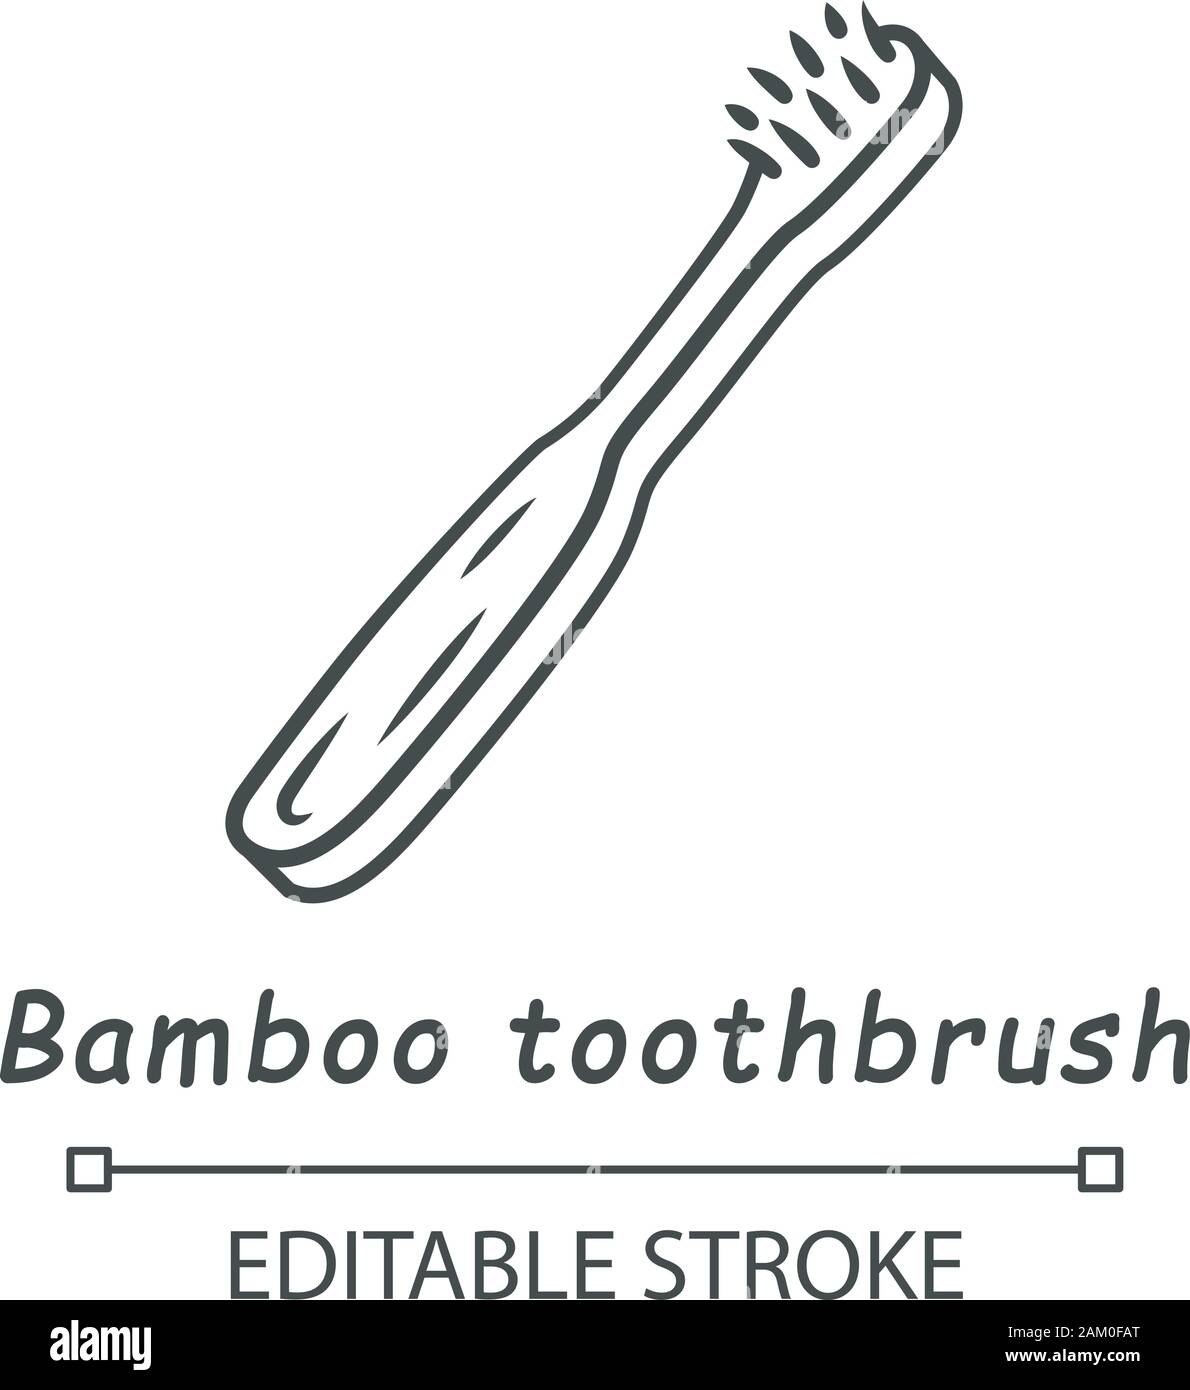 Bamboo toothbrush linear icon. Eco friendly, wooden teeth cleaning tool. Dental care product. Eco brush. Thin line illustration. Contour symbol. Vecto Stock Vector